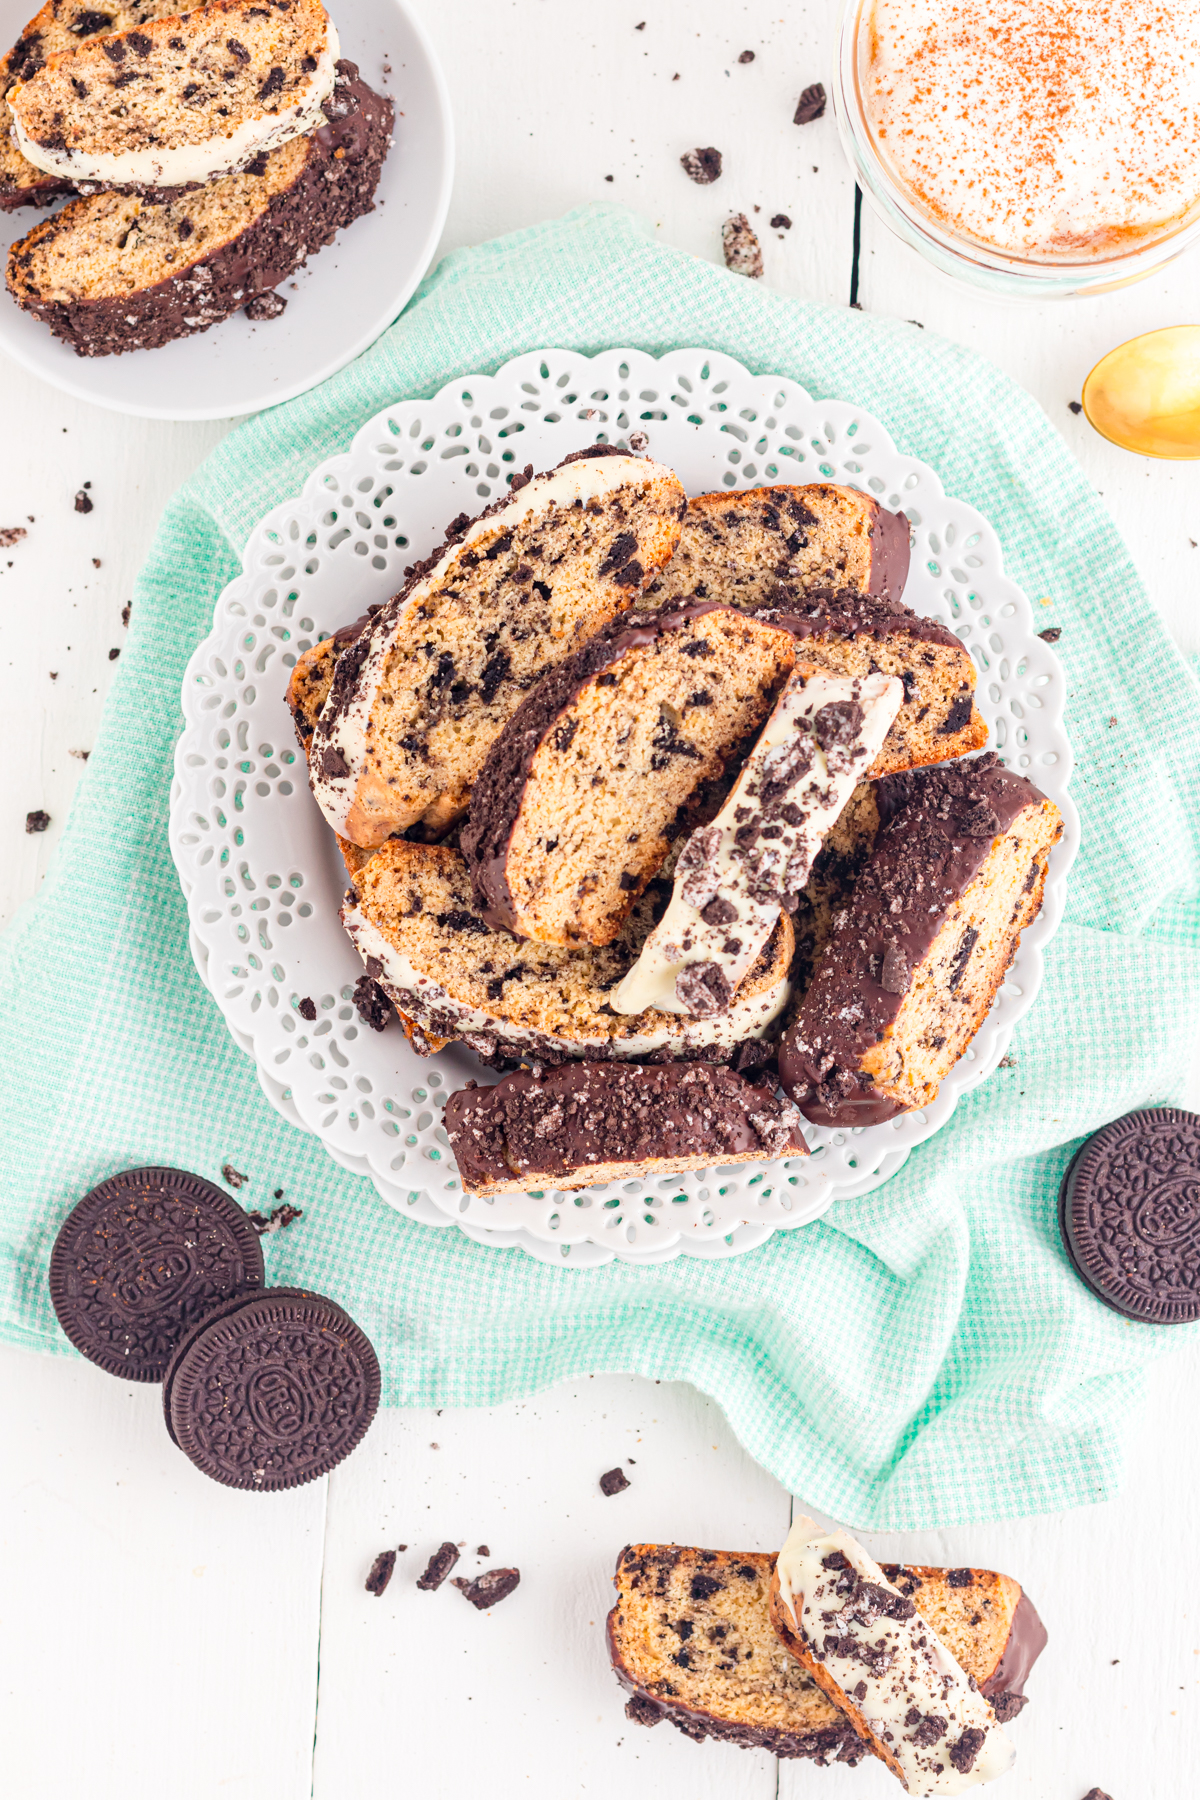 Oreo Biscotti on a plate with crumbs on the table.